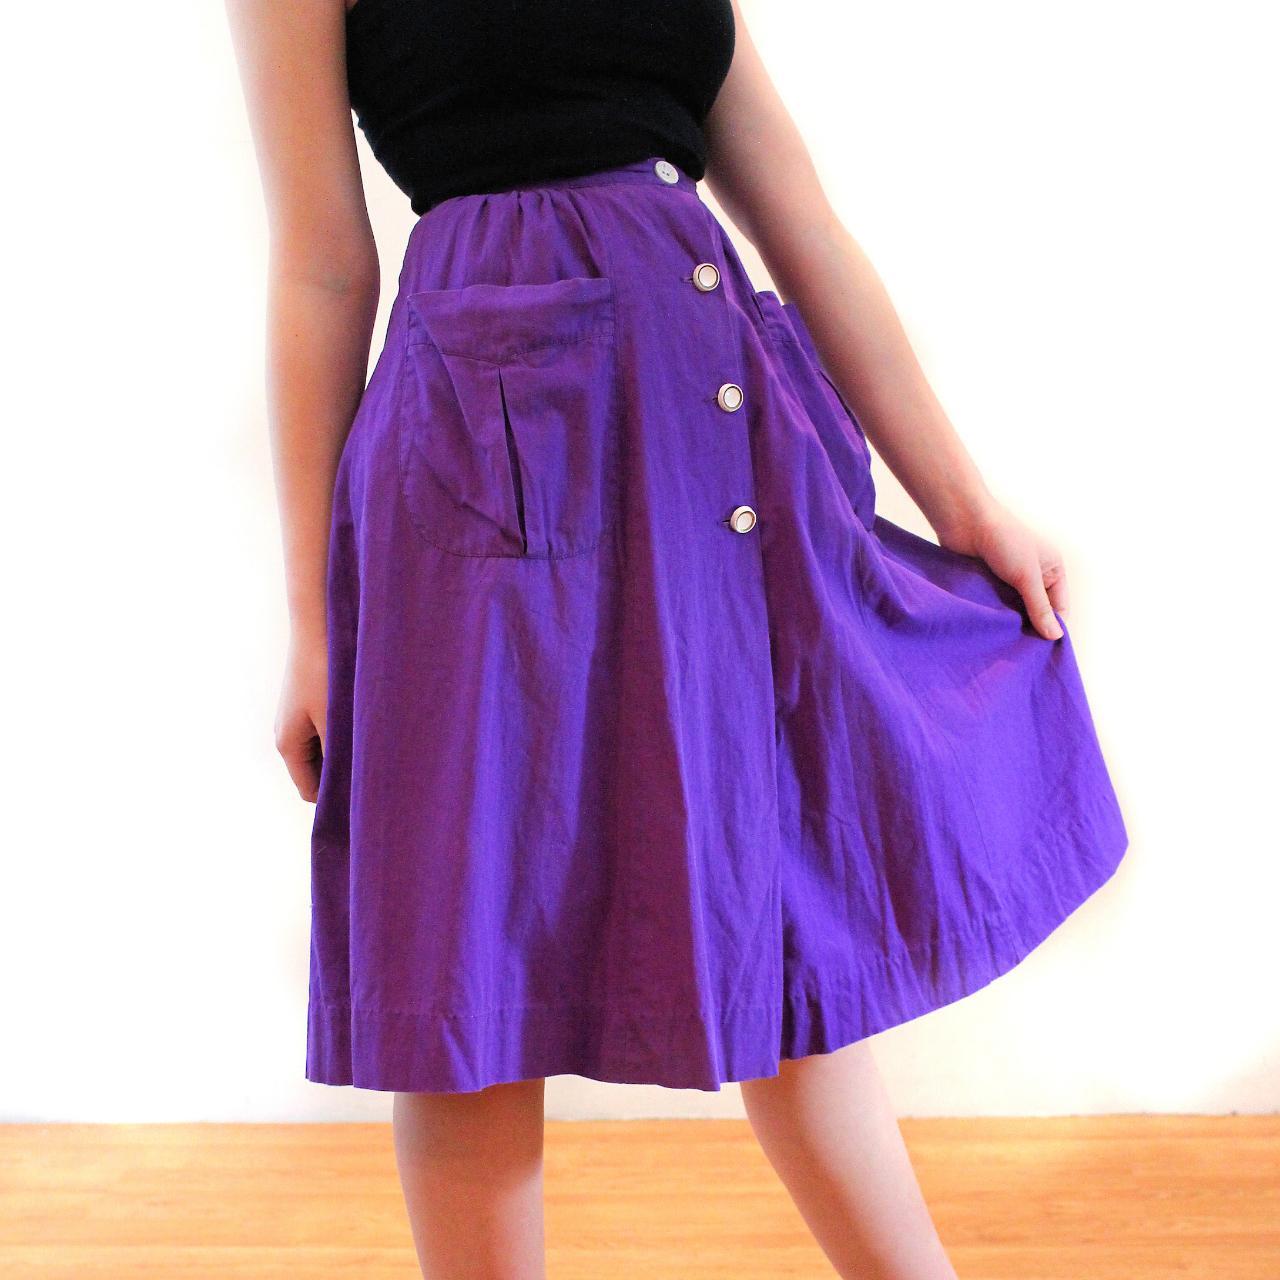 This is a cute 1950s vintage skirt in a vibrant... - Depop